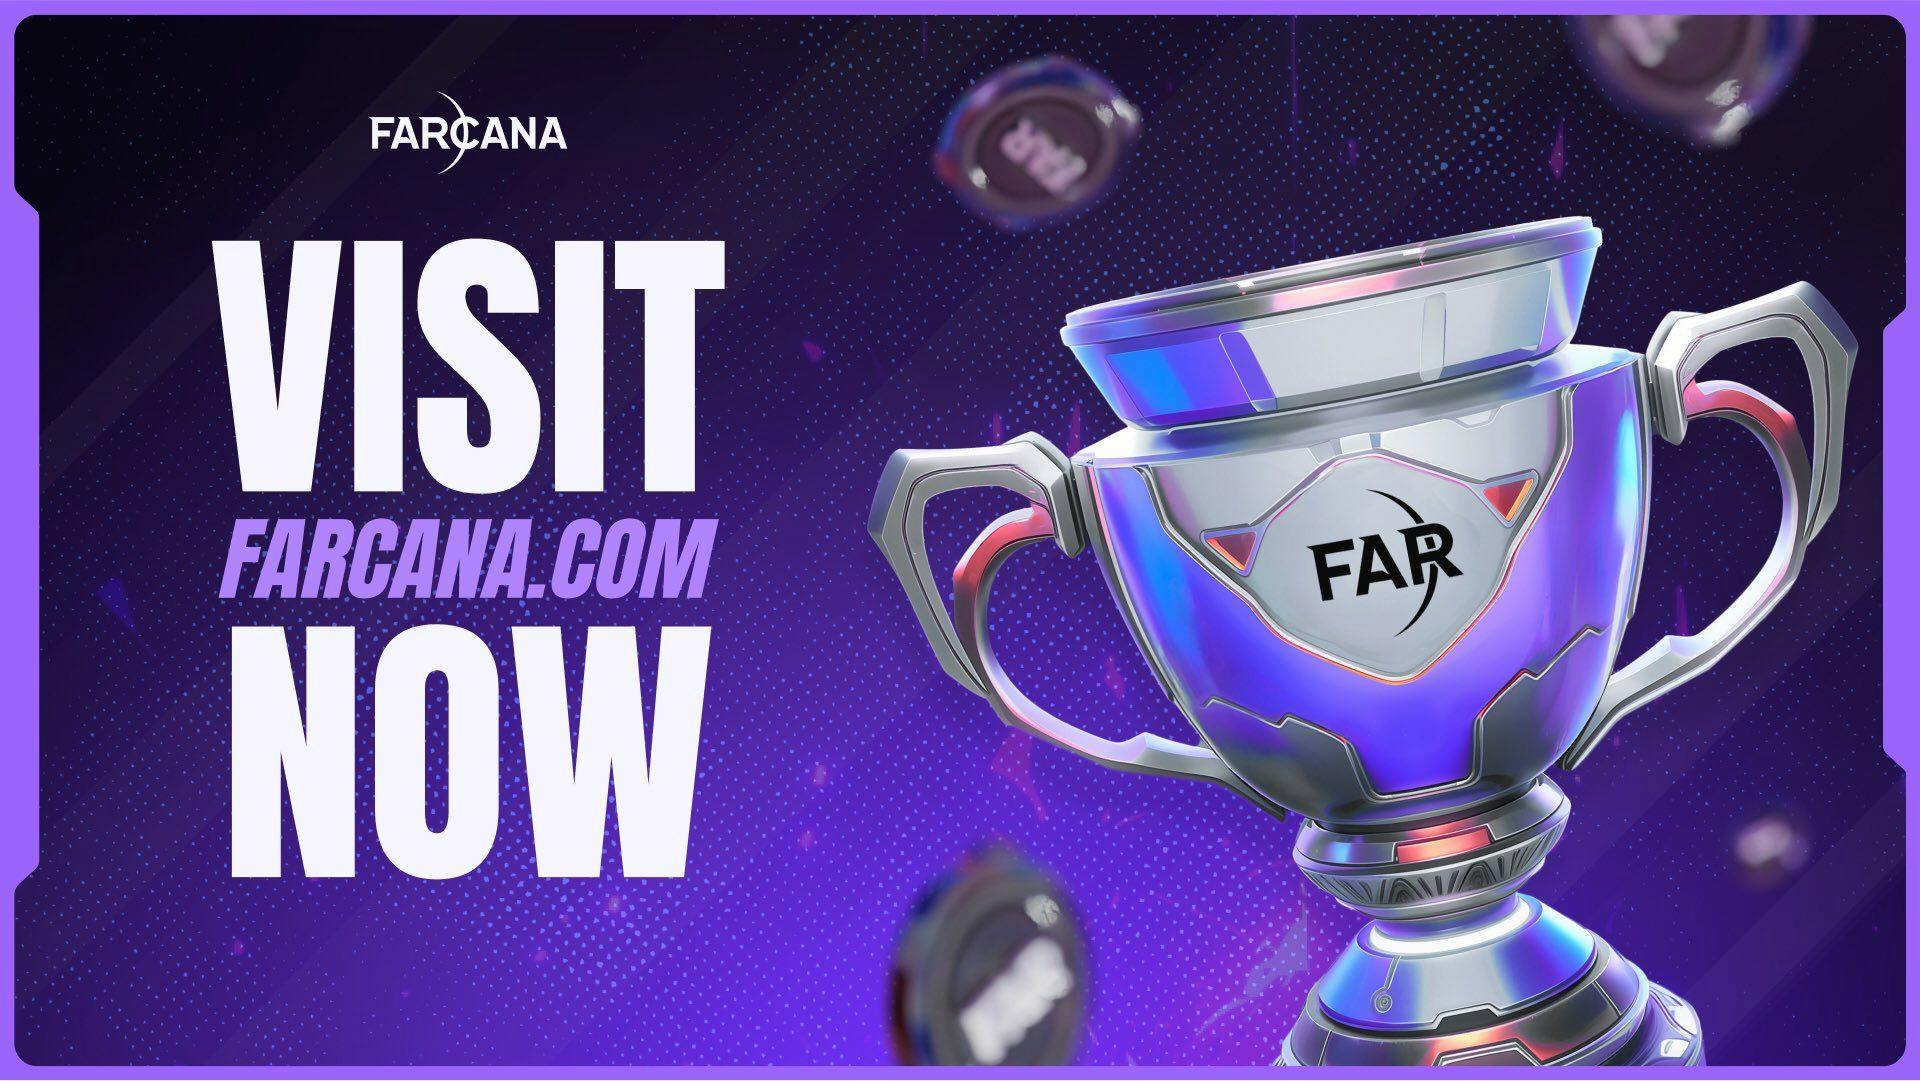 Farcana Reveals Playtest Event with $1 Million Prize Pool